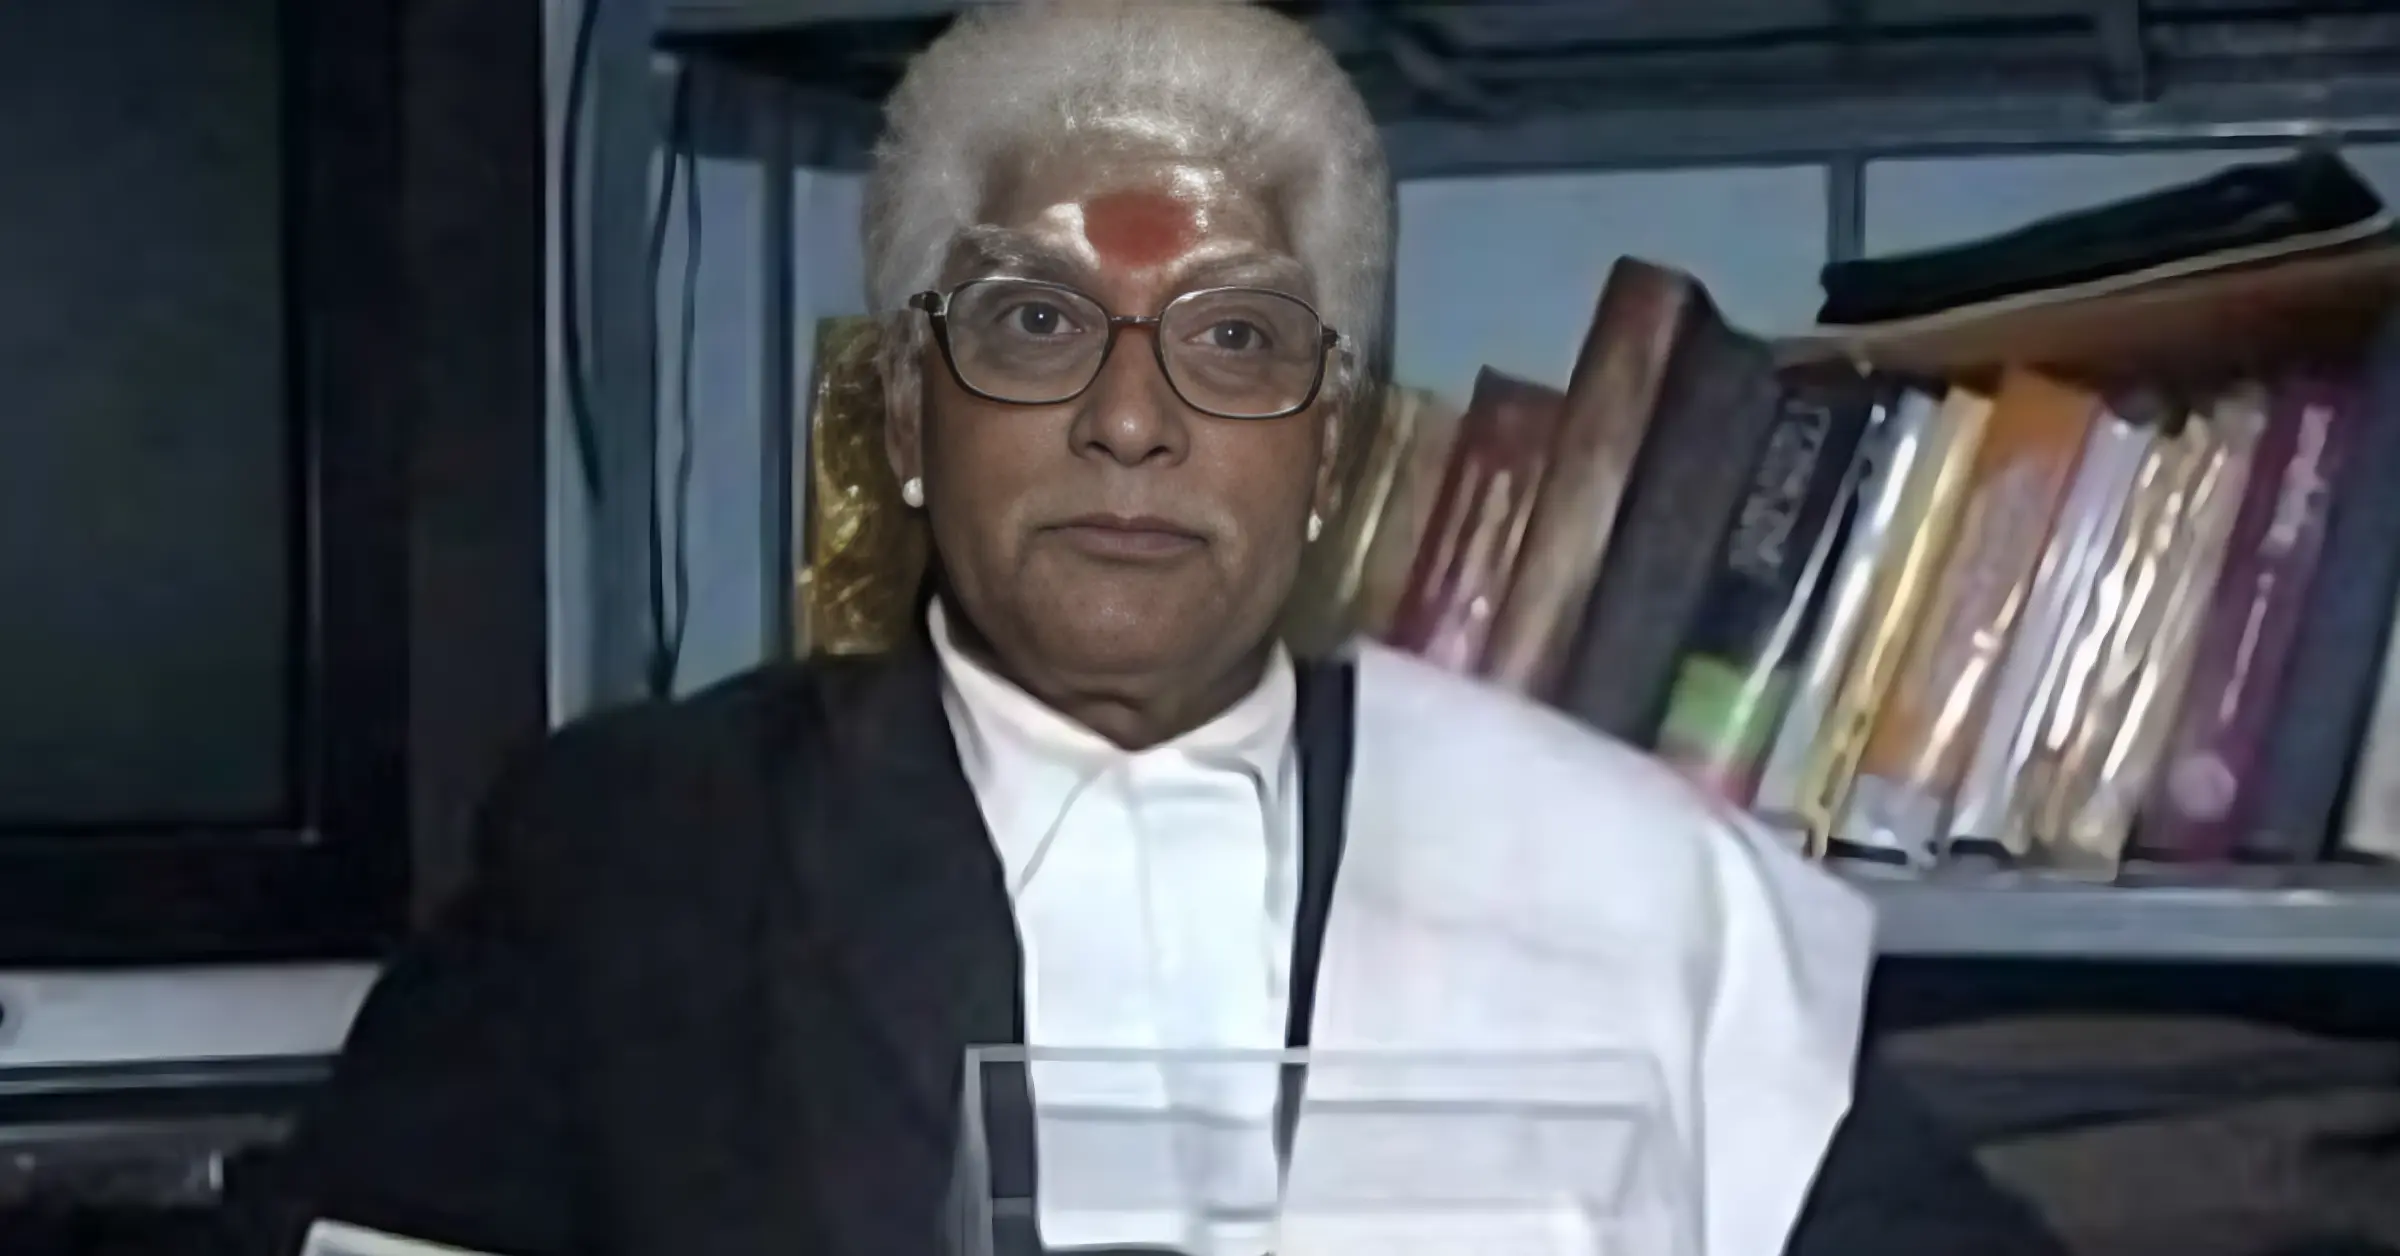 Meet Shyam Upadhyay, the only advocate in the world who fights legal cases in Sanskrit | INFORMEIA